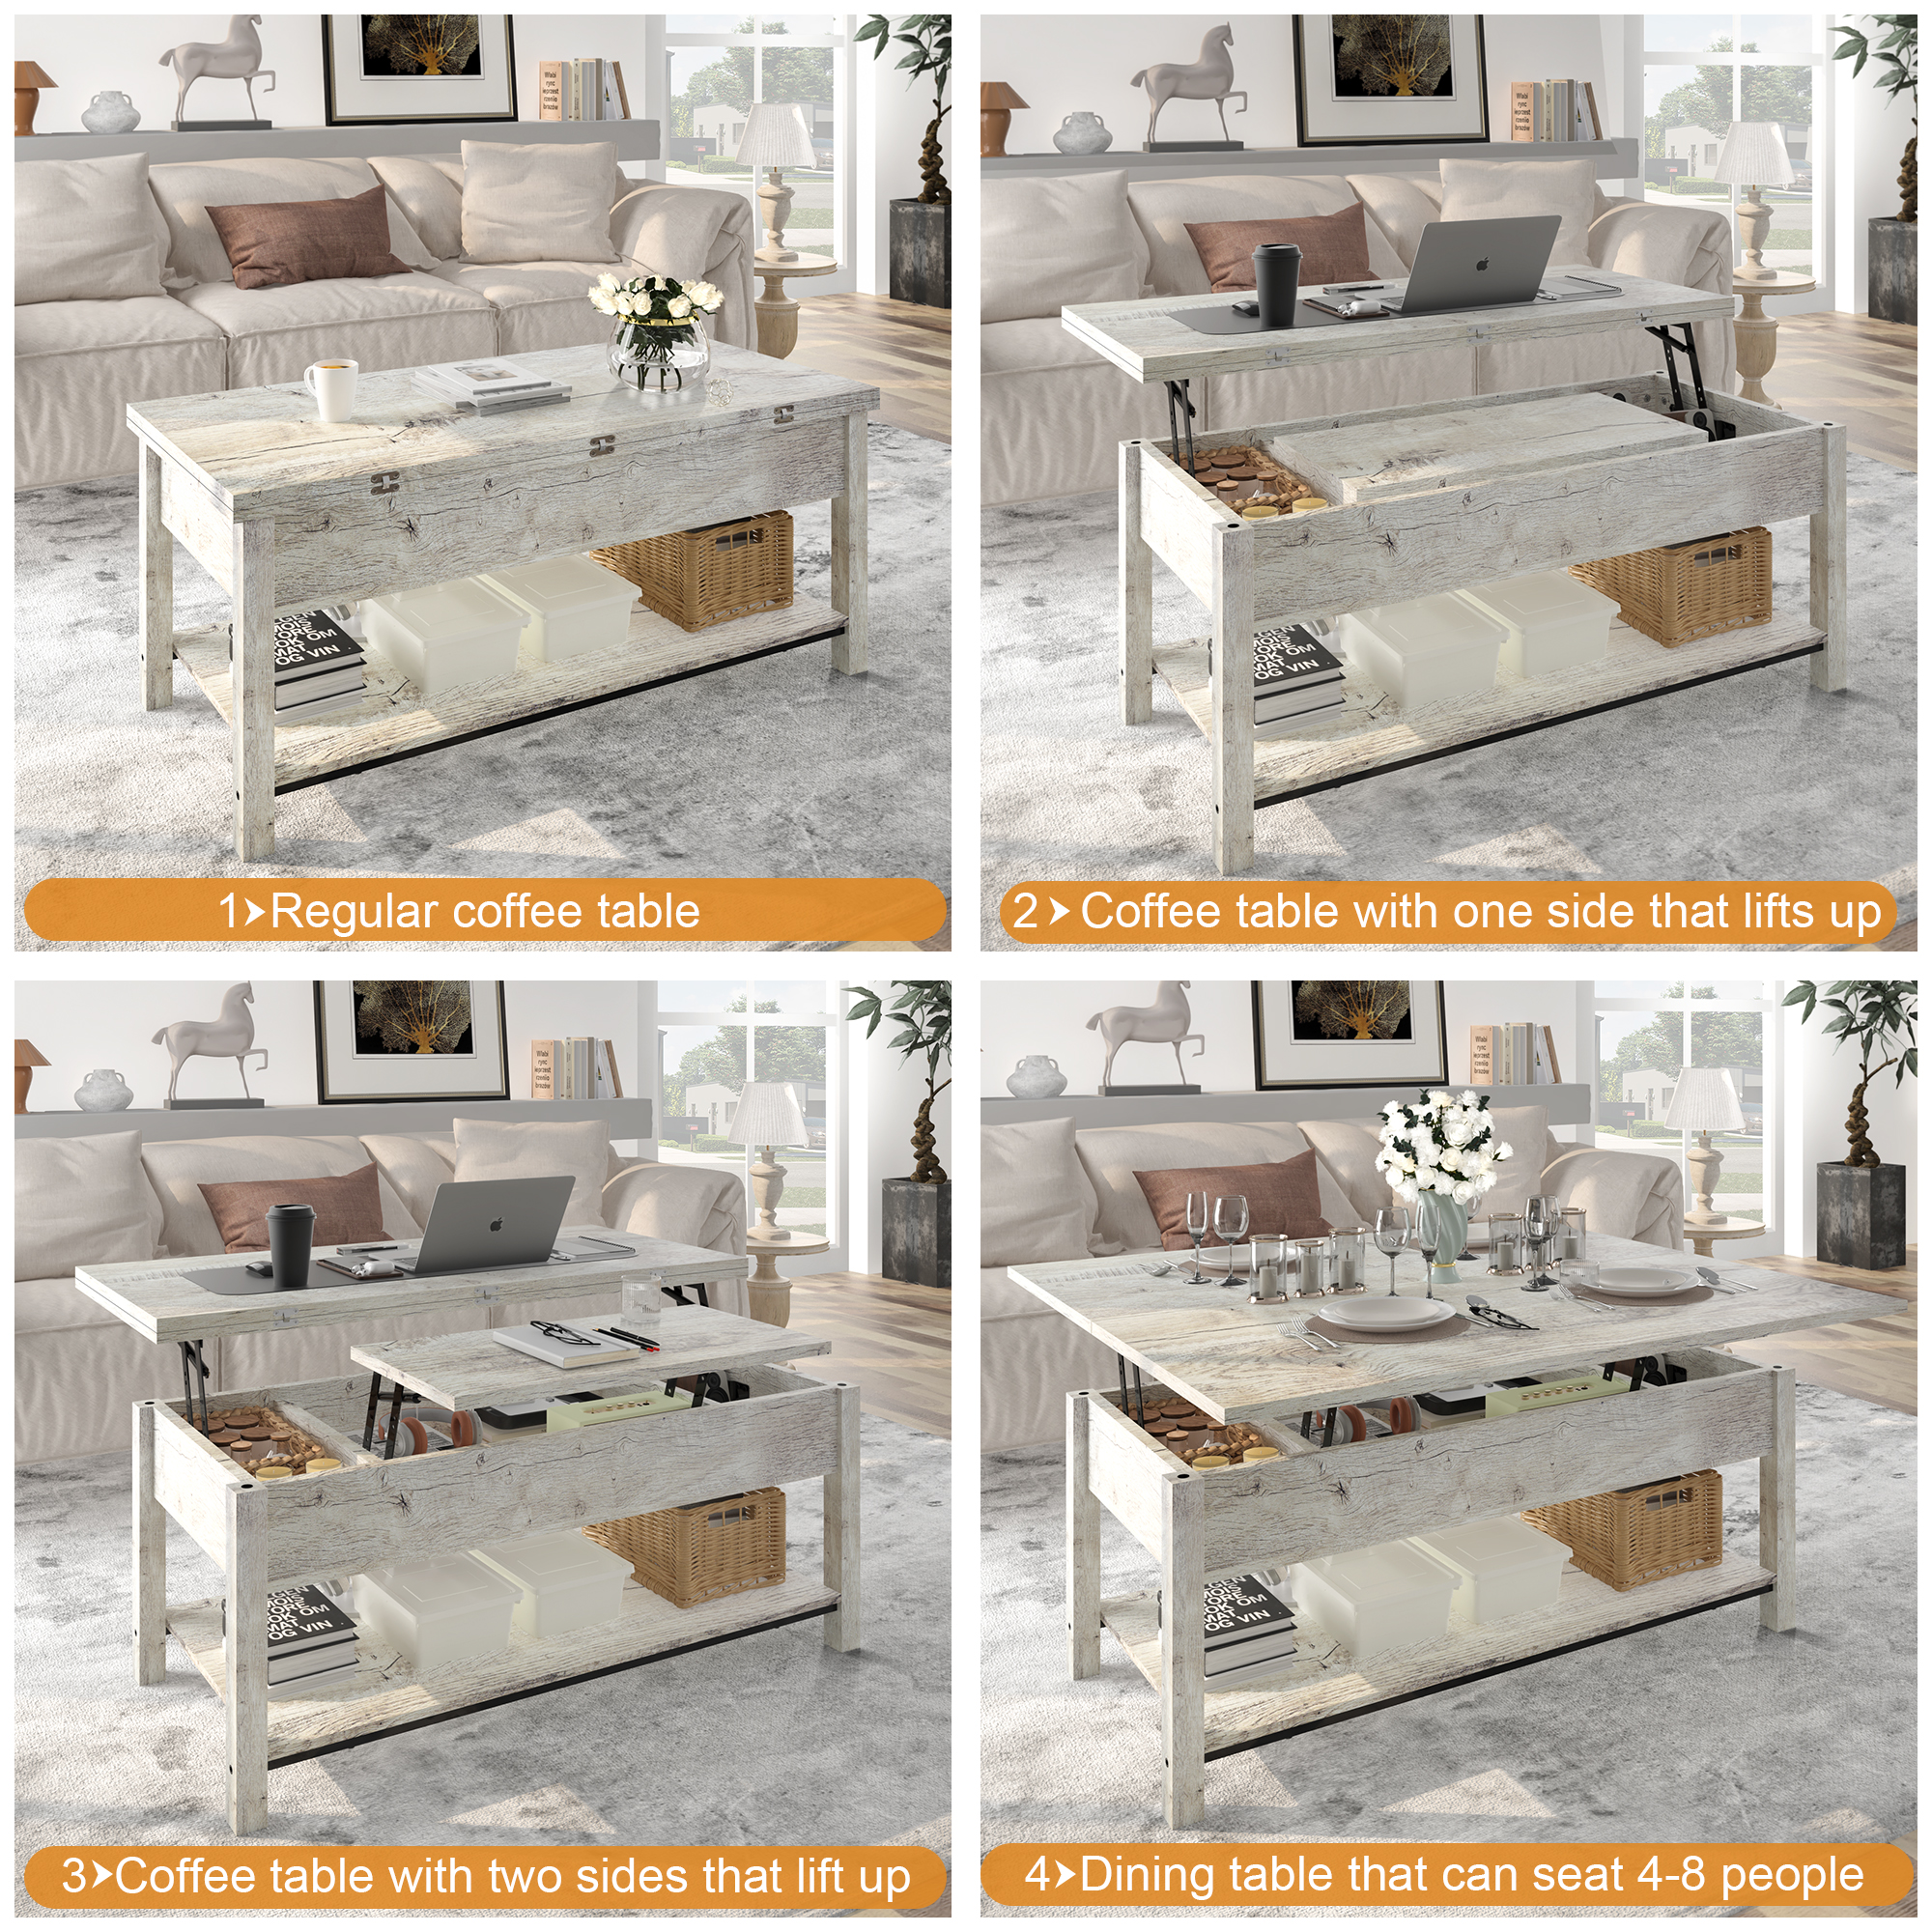 GUNAITO 41.73"Lift Top Coffee Table 4 in 1 Multi-Function Convertible Coffee Table with Storage Modern Coffee Table Converts to Dining Table for Living Room Grey - image 3 of 8